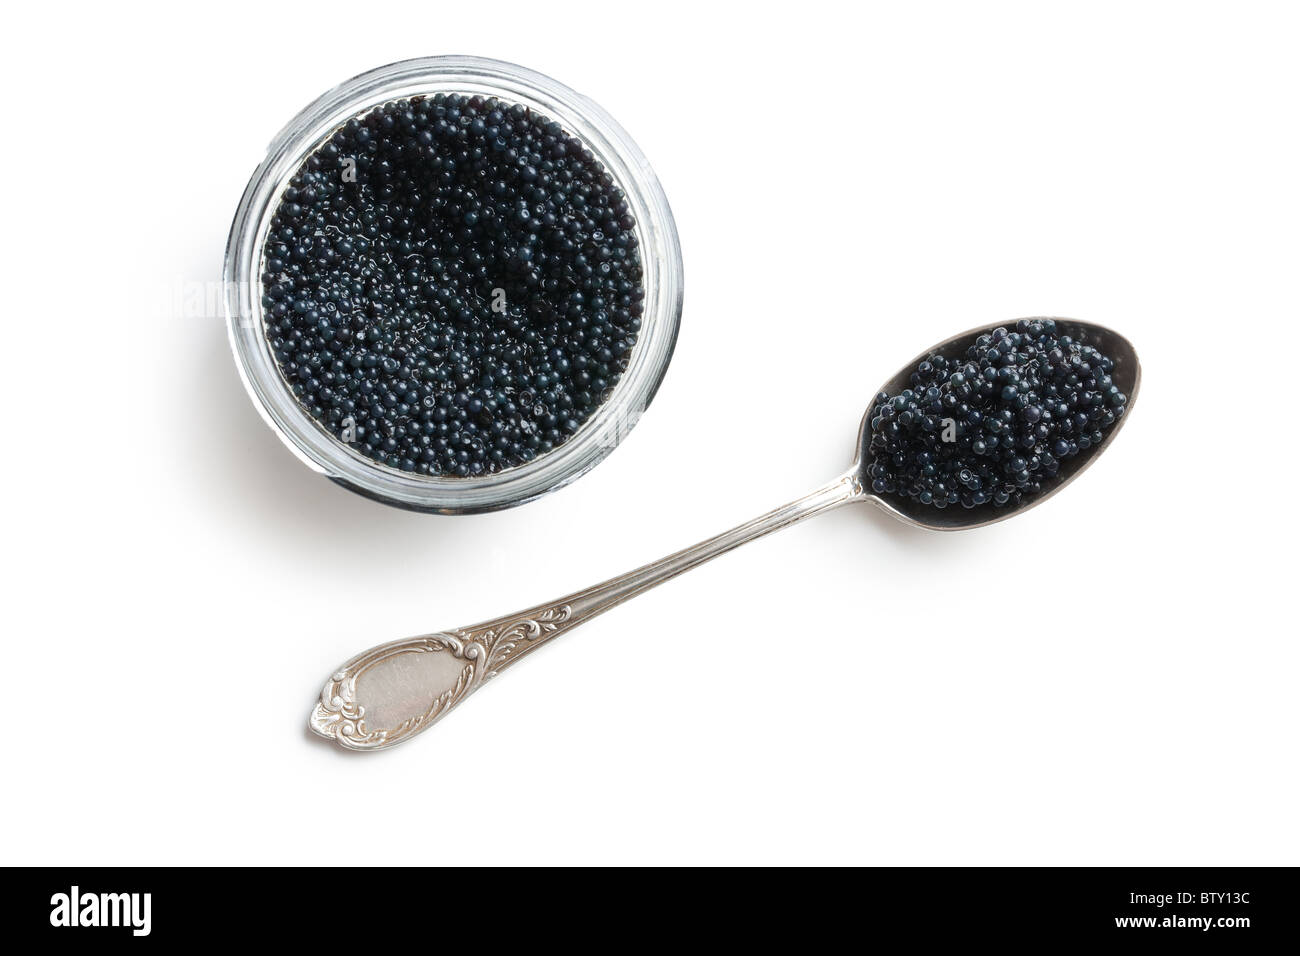 black caviar in spoon on white background Stock Photo